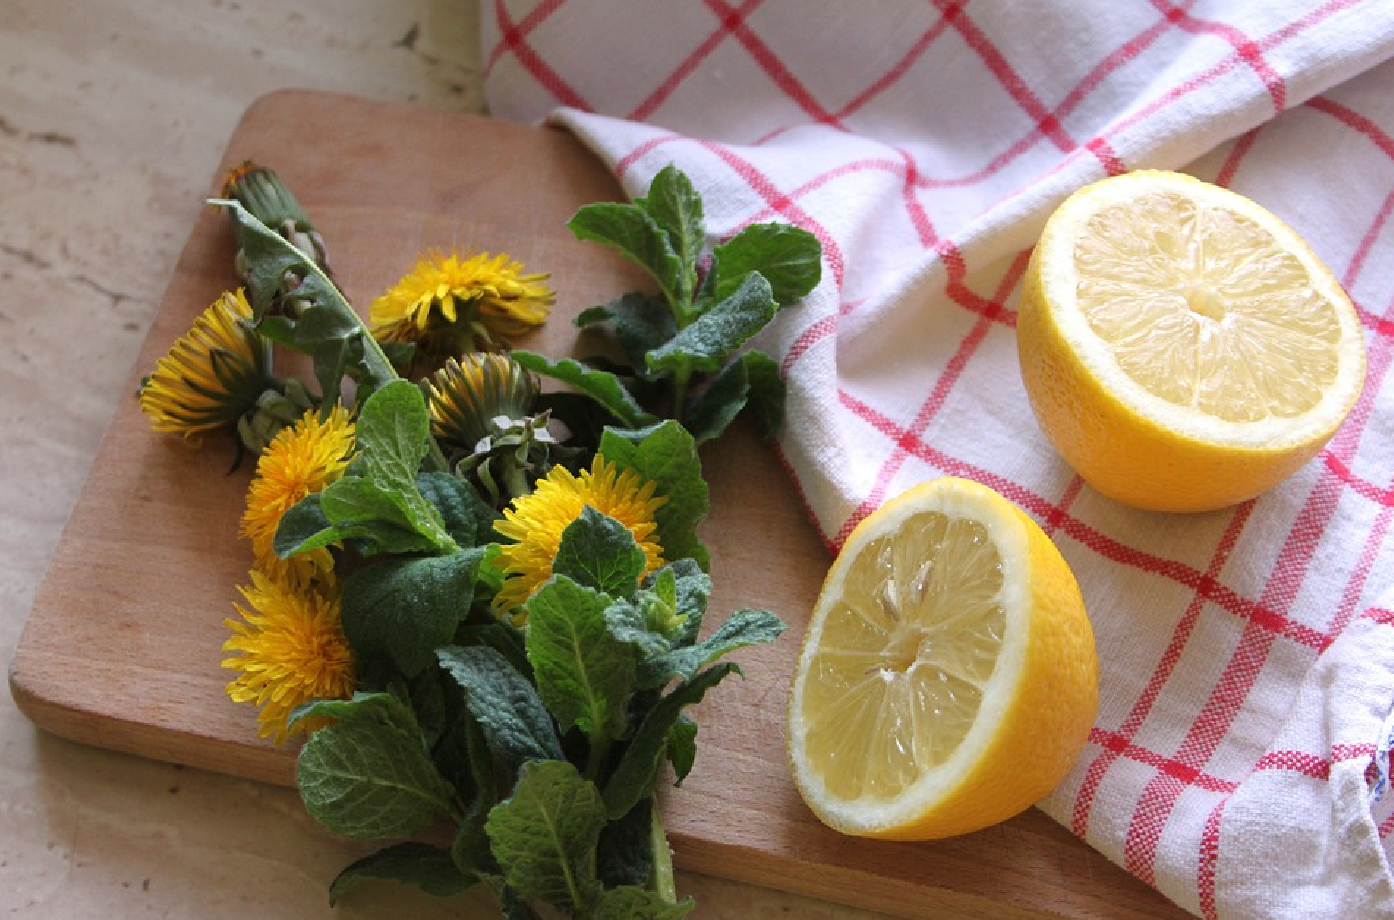 What to make with dandelions